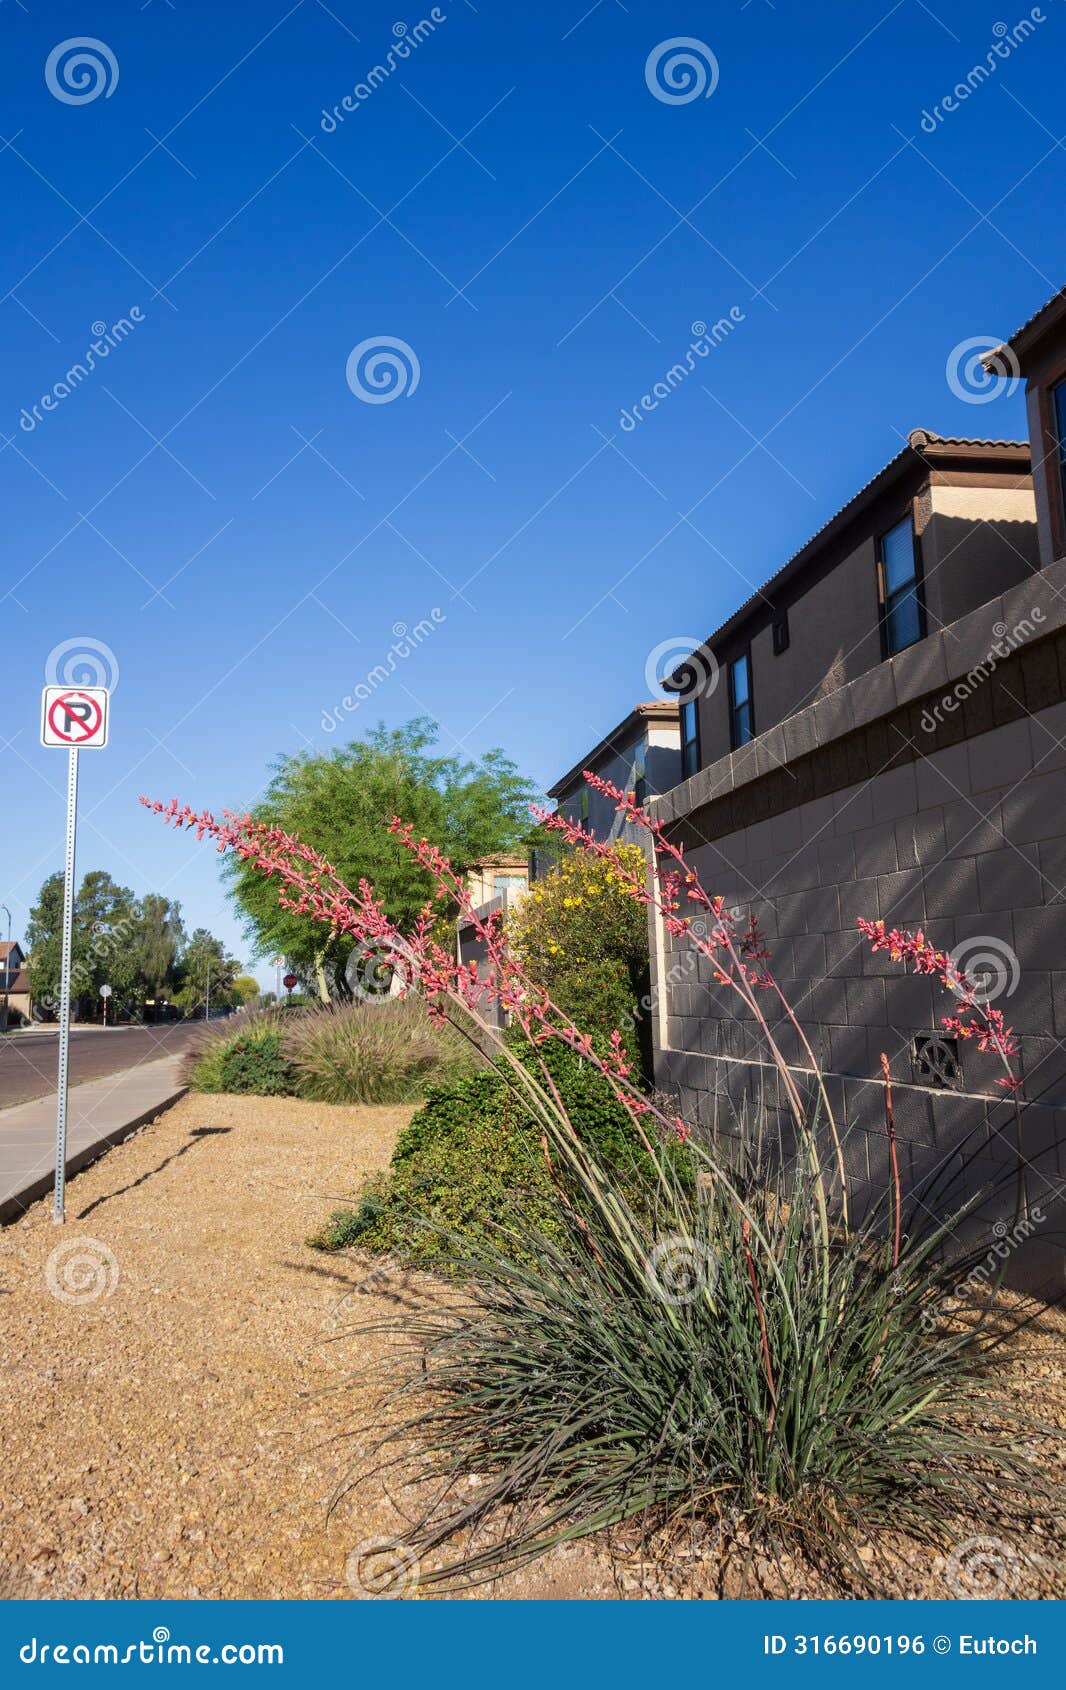 flowering red yucca, hesperaloe parviflora, along xeriscaped city streets in phoenix, az